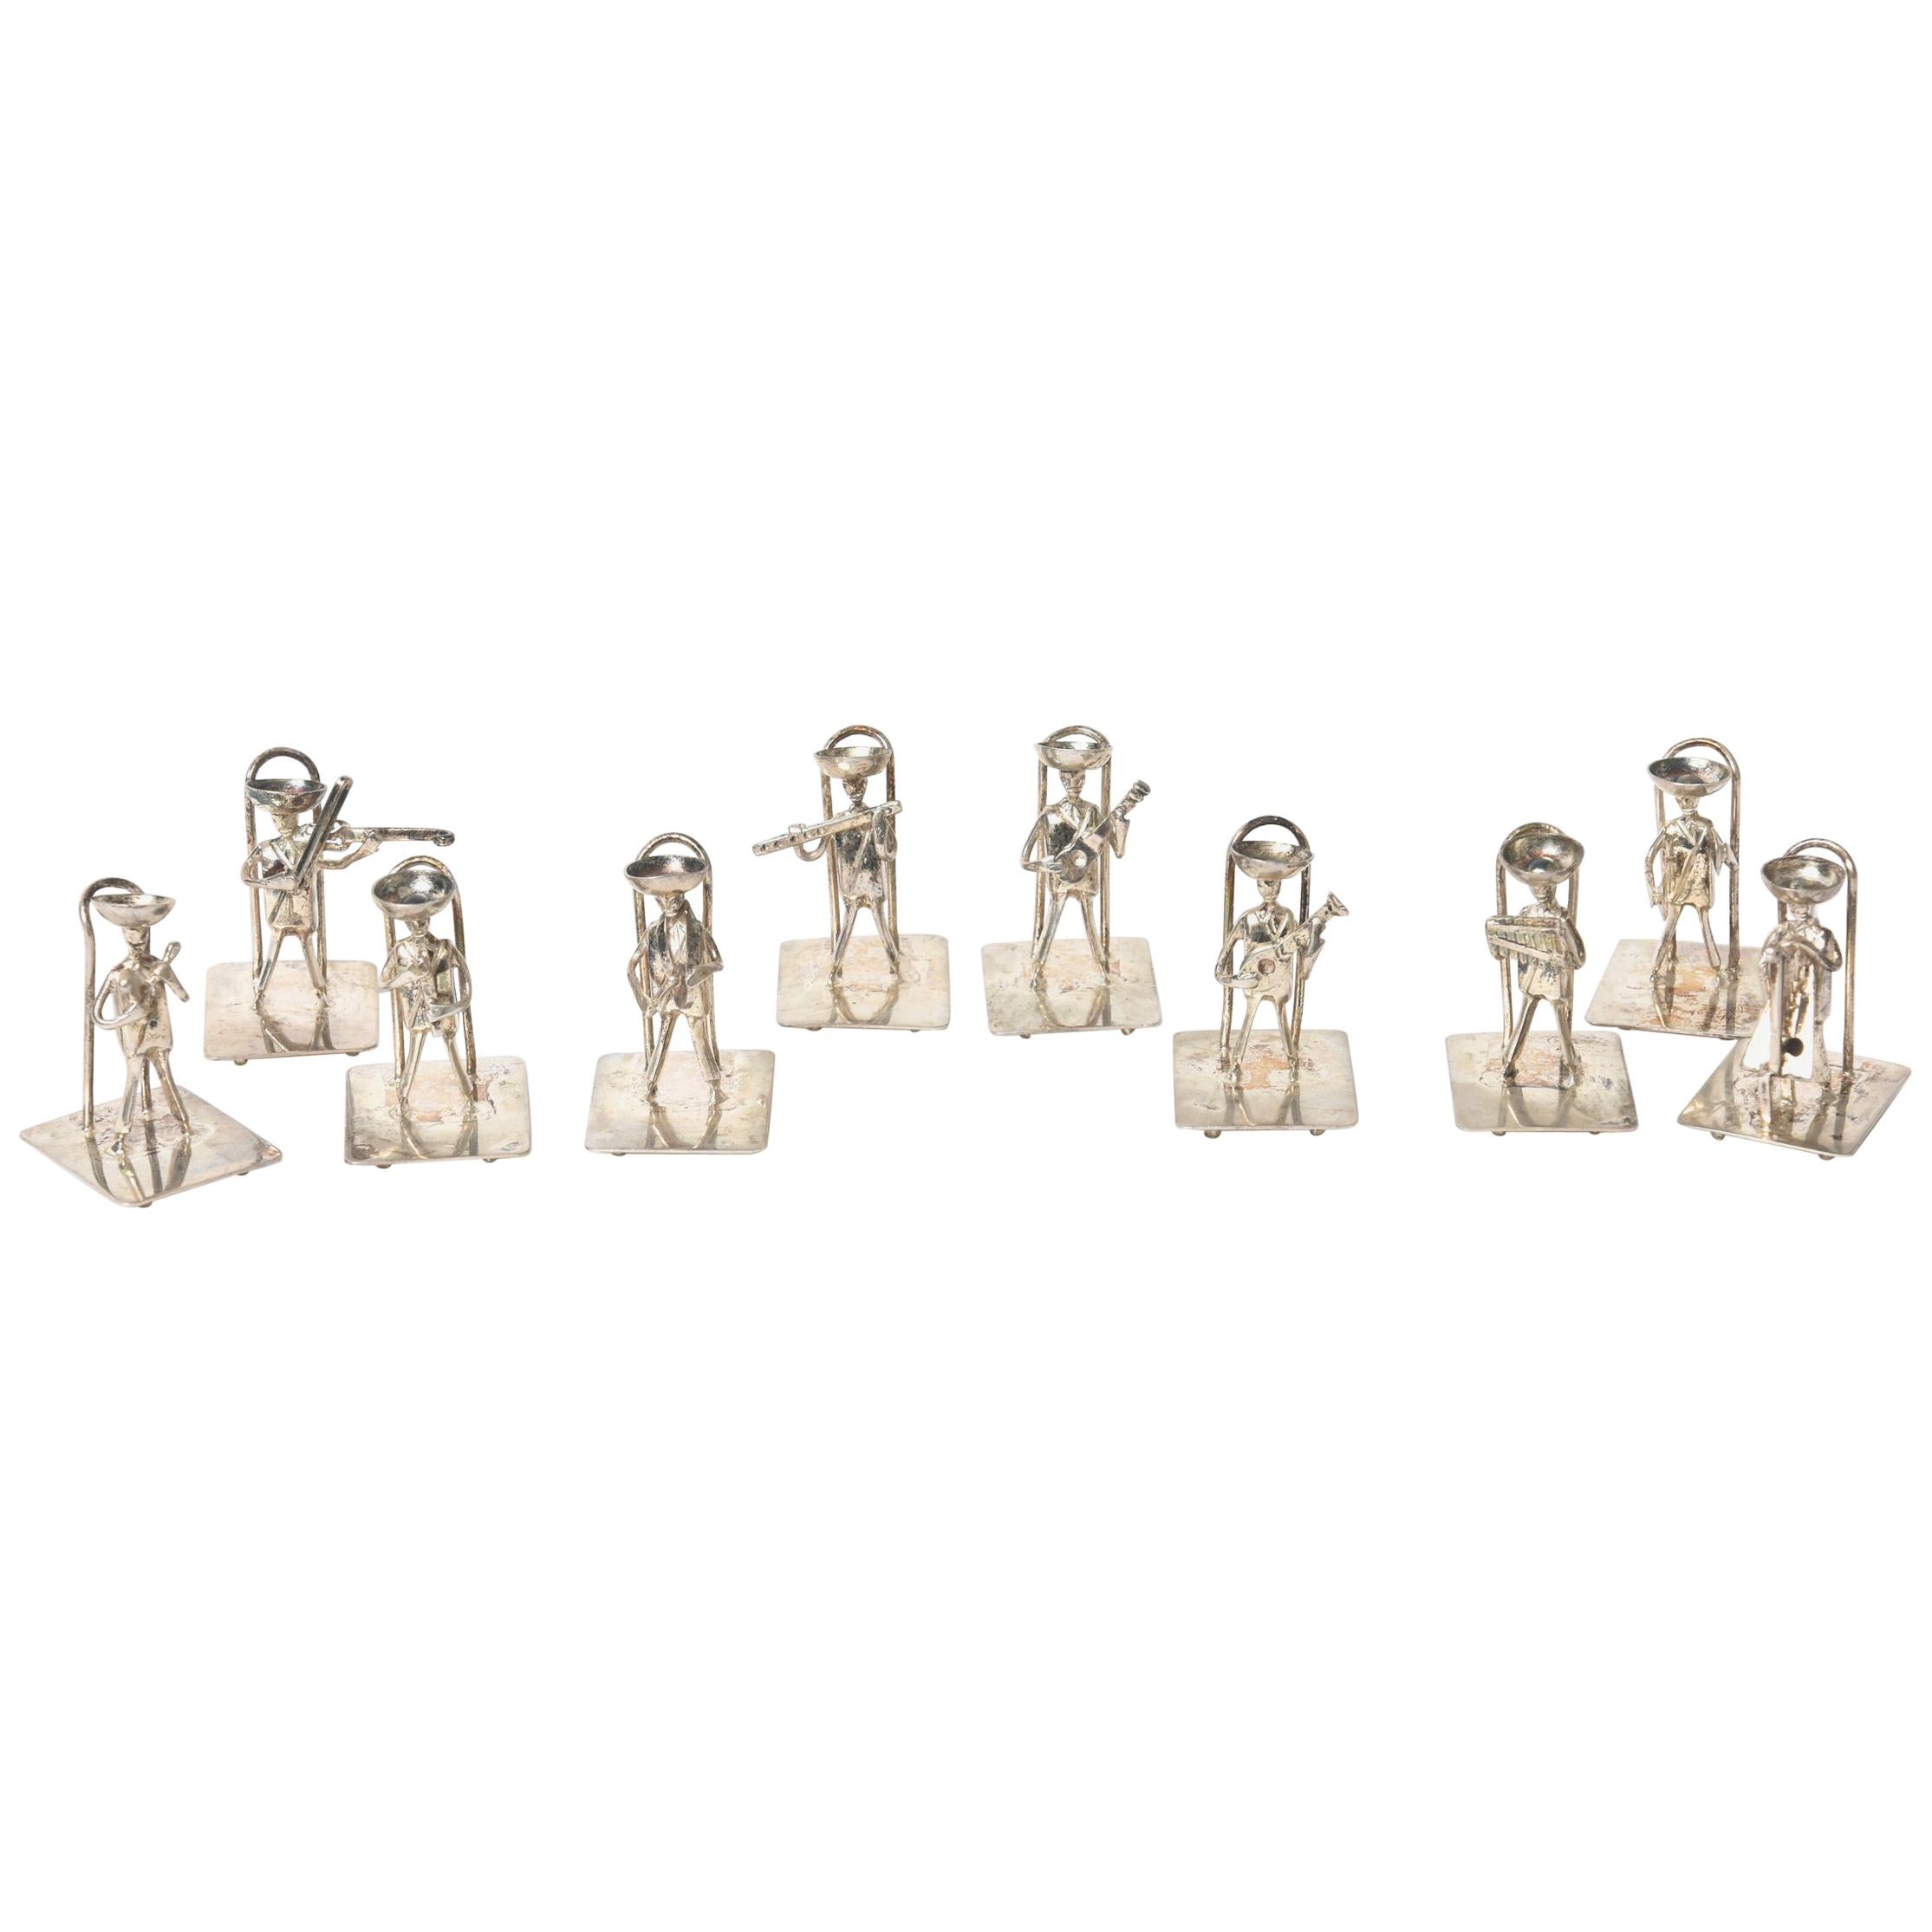 Silver Musician Mariachi Band Figural Place Card Holders Placecard Set of 10